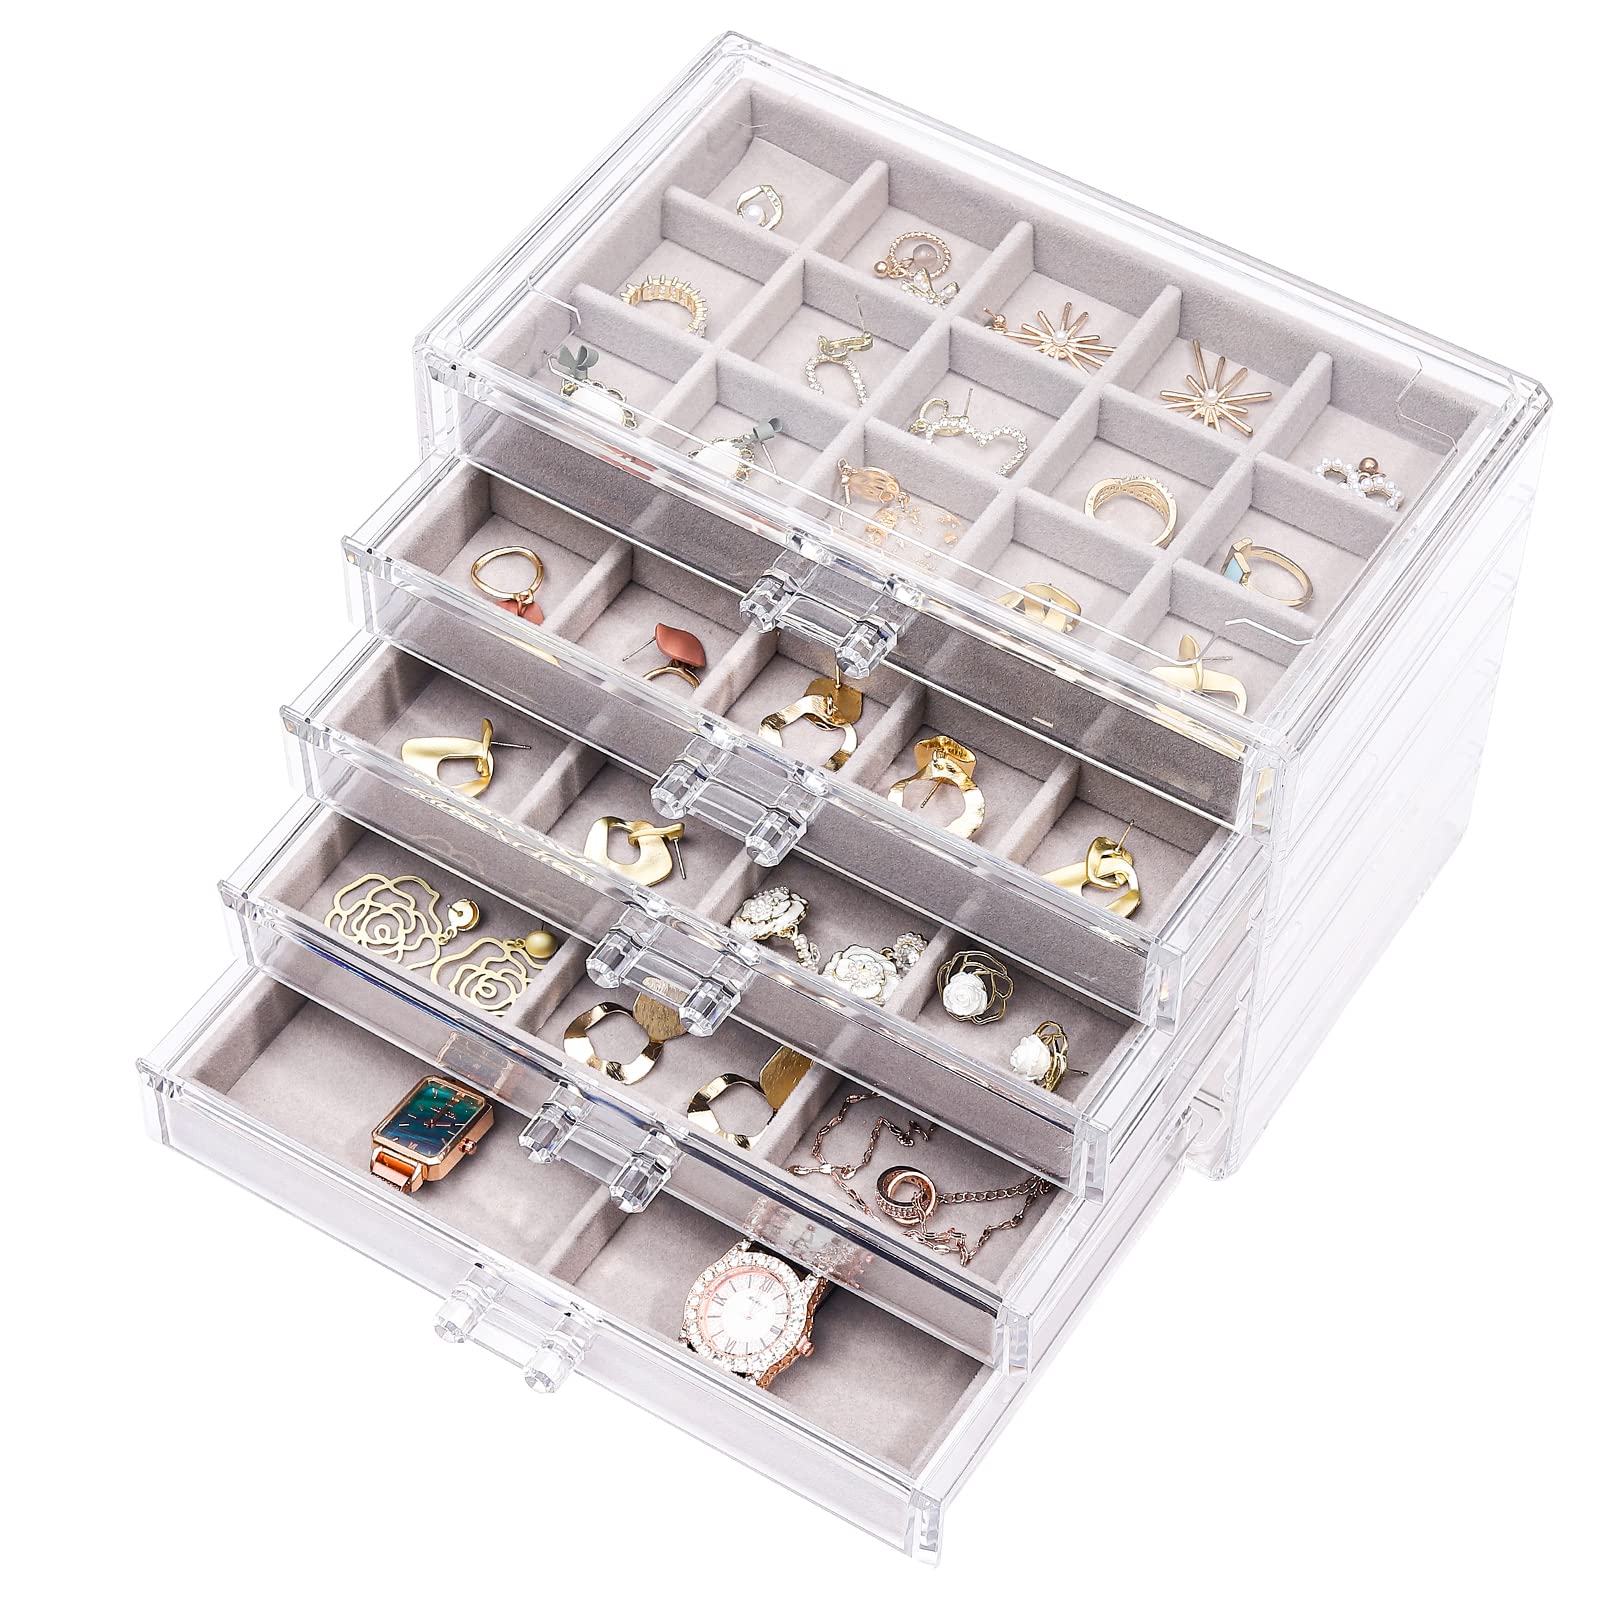 Cq acrylic Earring Jewelry Organizer with 5 Drawers,Clear Acrylic Jewelry Box for Women,Velvet Earring Display Holder for Earrings Ring Bracelet Necklace,Birthday and Christmas Gift,Grey